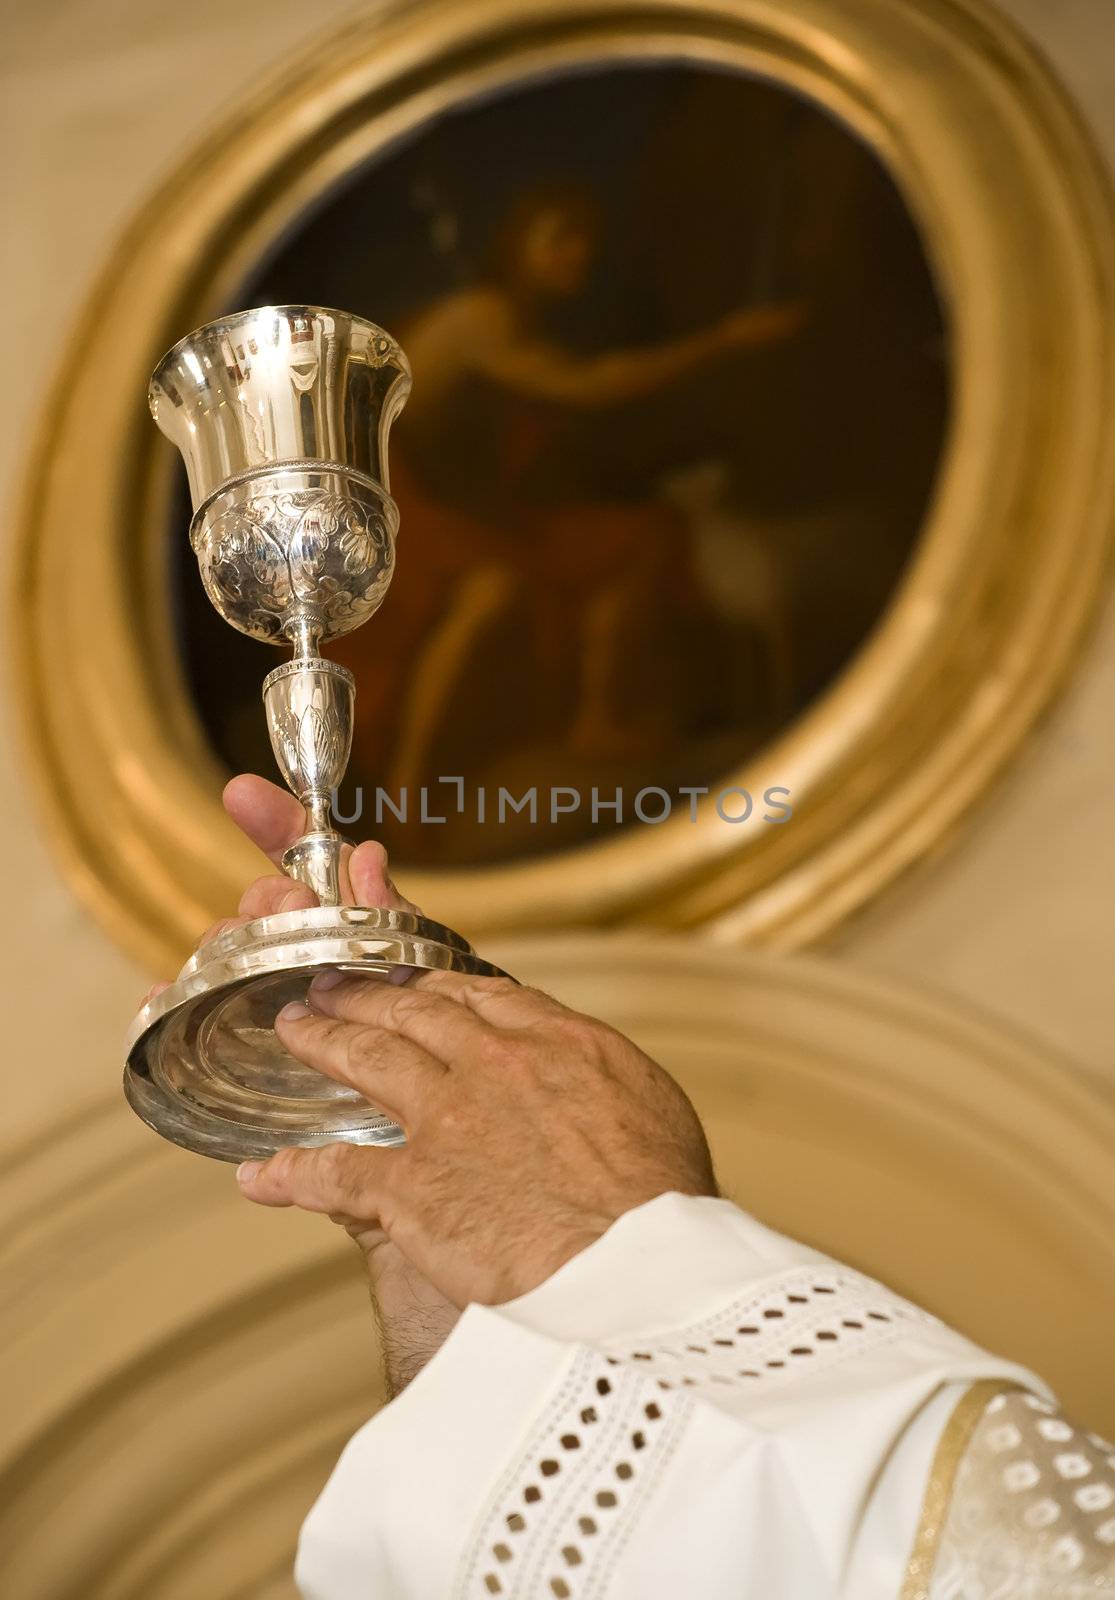 Priest's hands during Mass raising the chalice